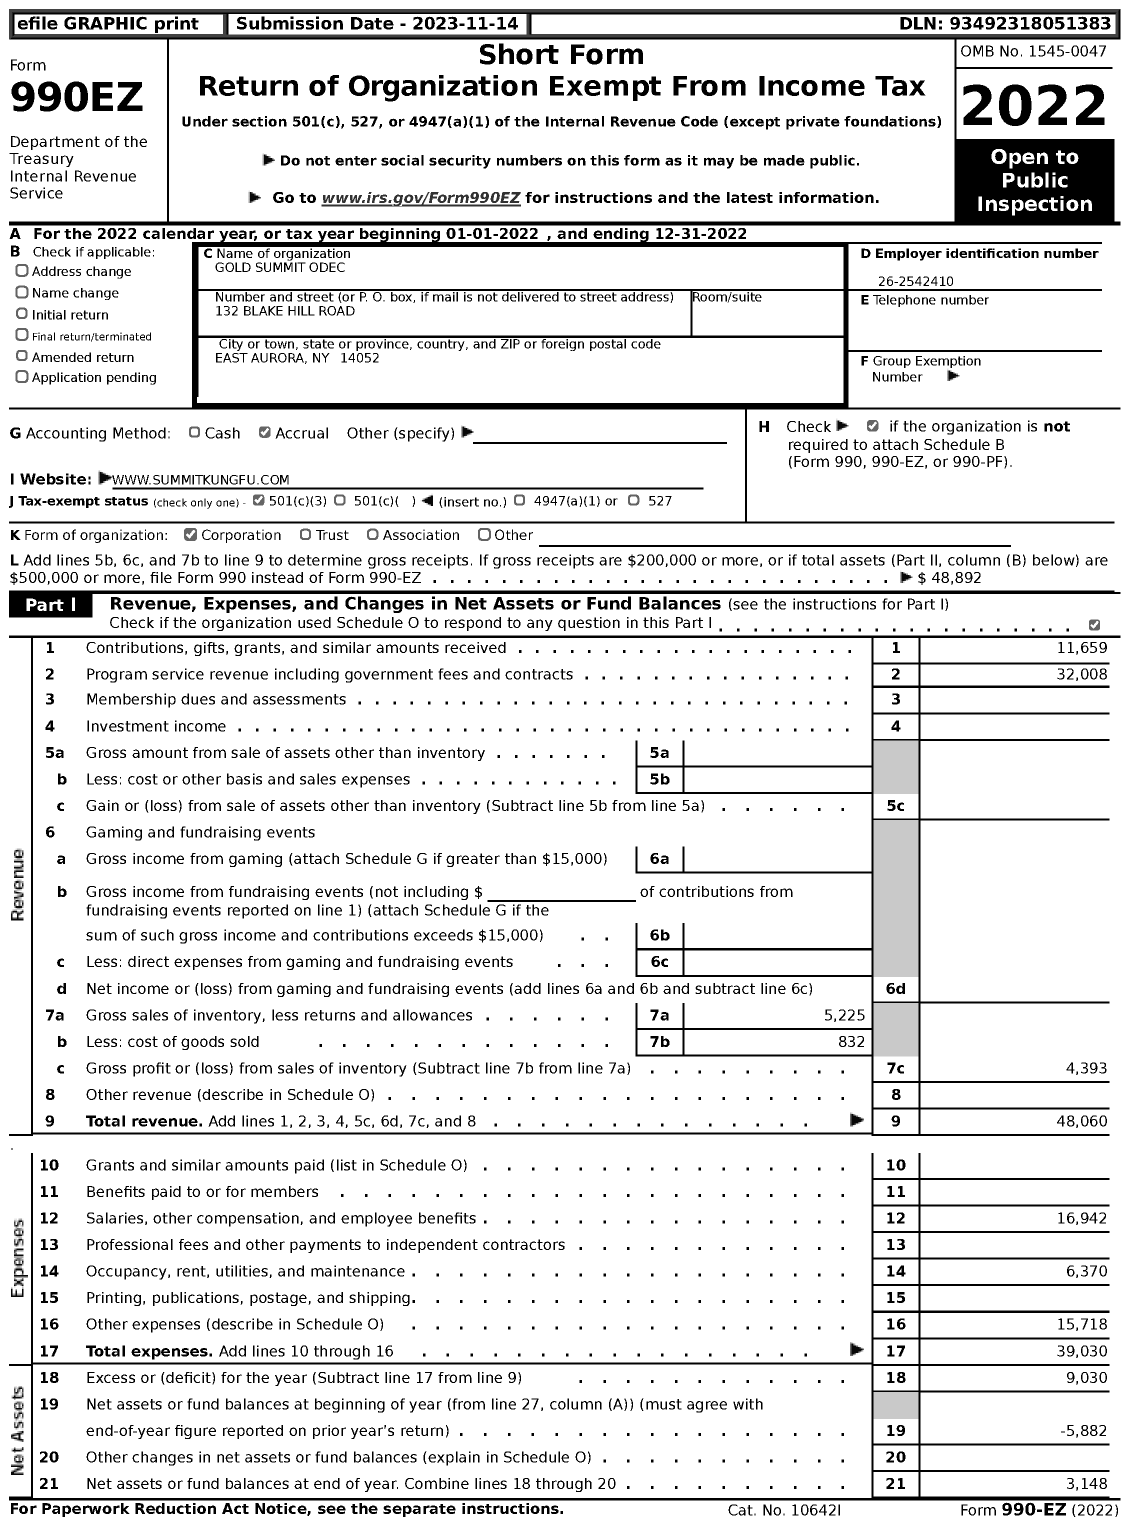 Image of first page of 2022 Form 990EZ for Gold Summit Odec